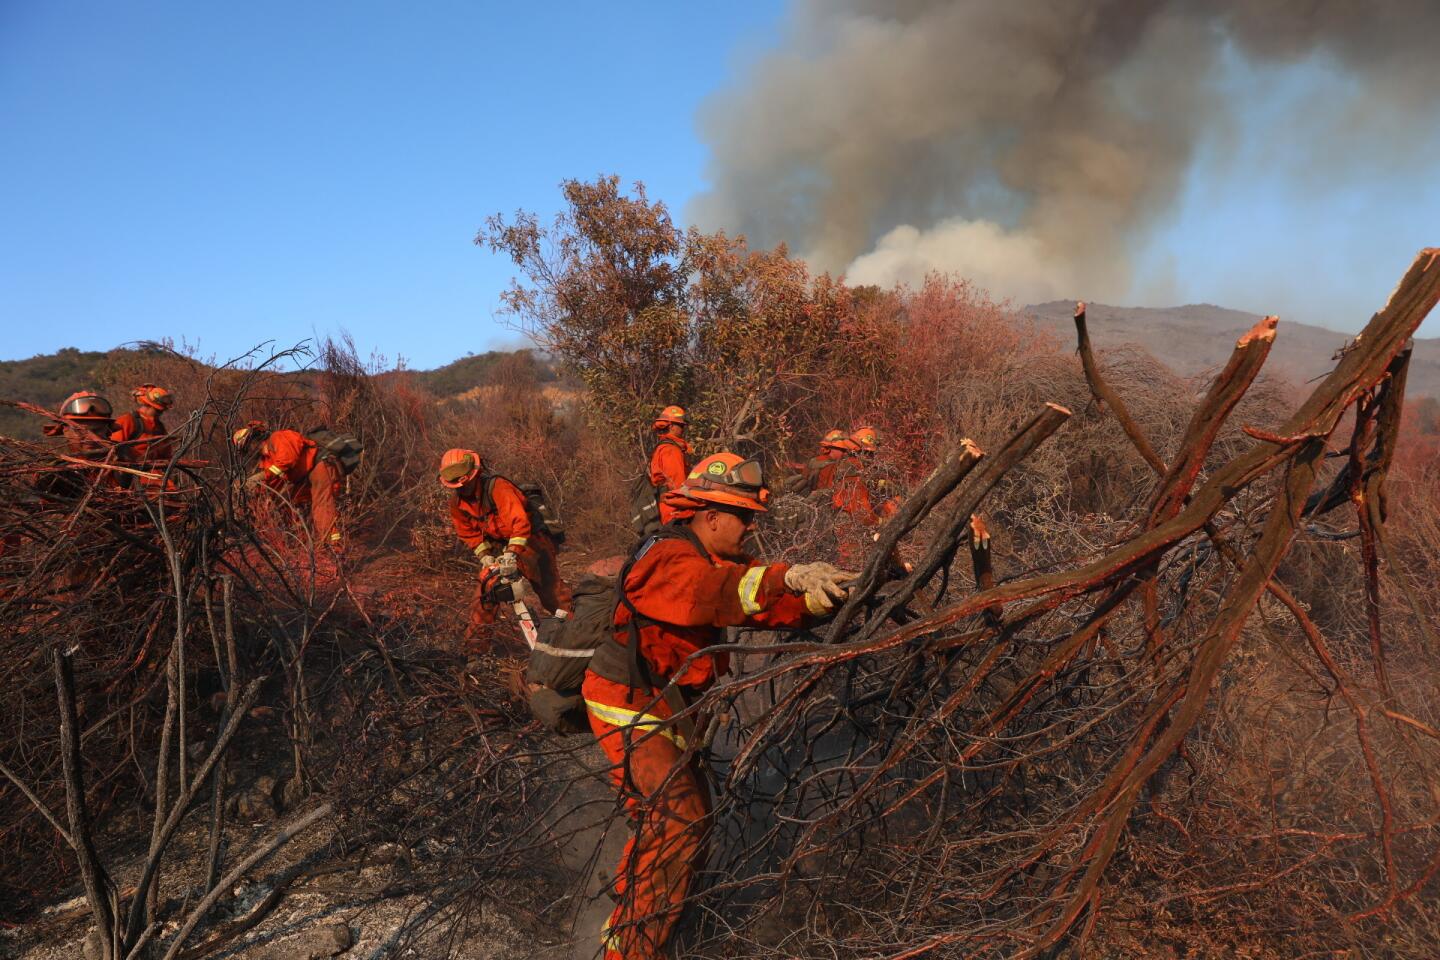 Colt Fire increases to 1,500 acres with 0% containment